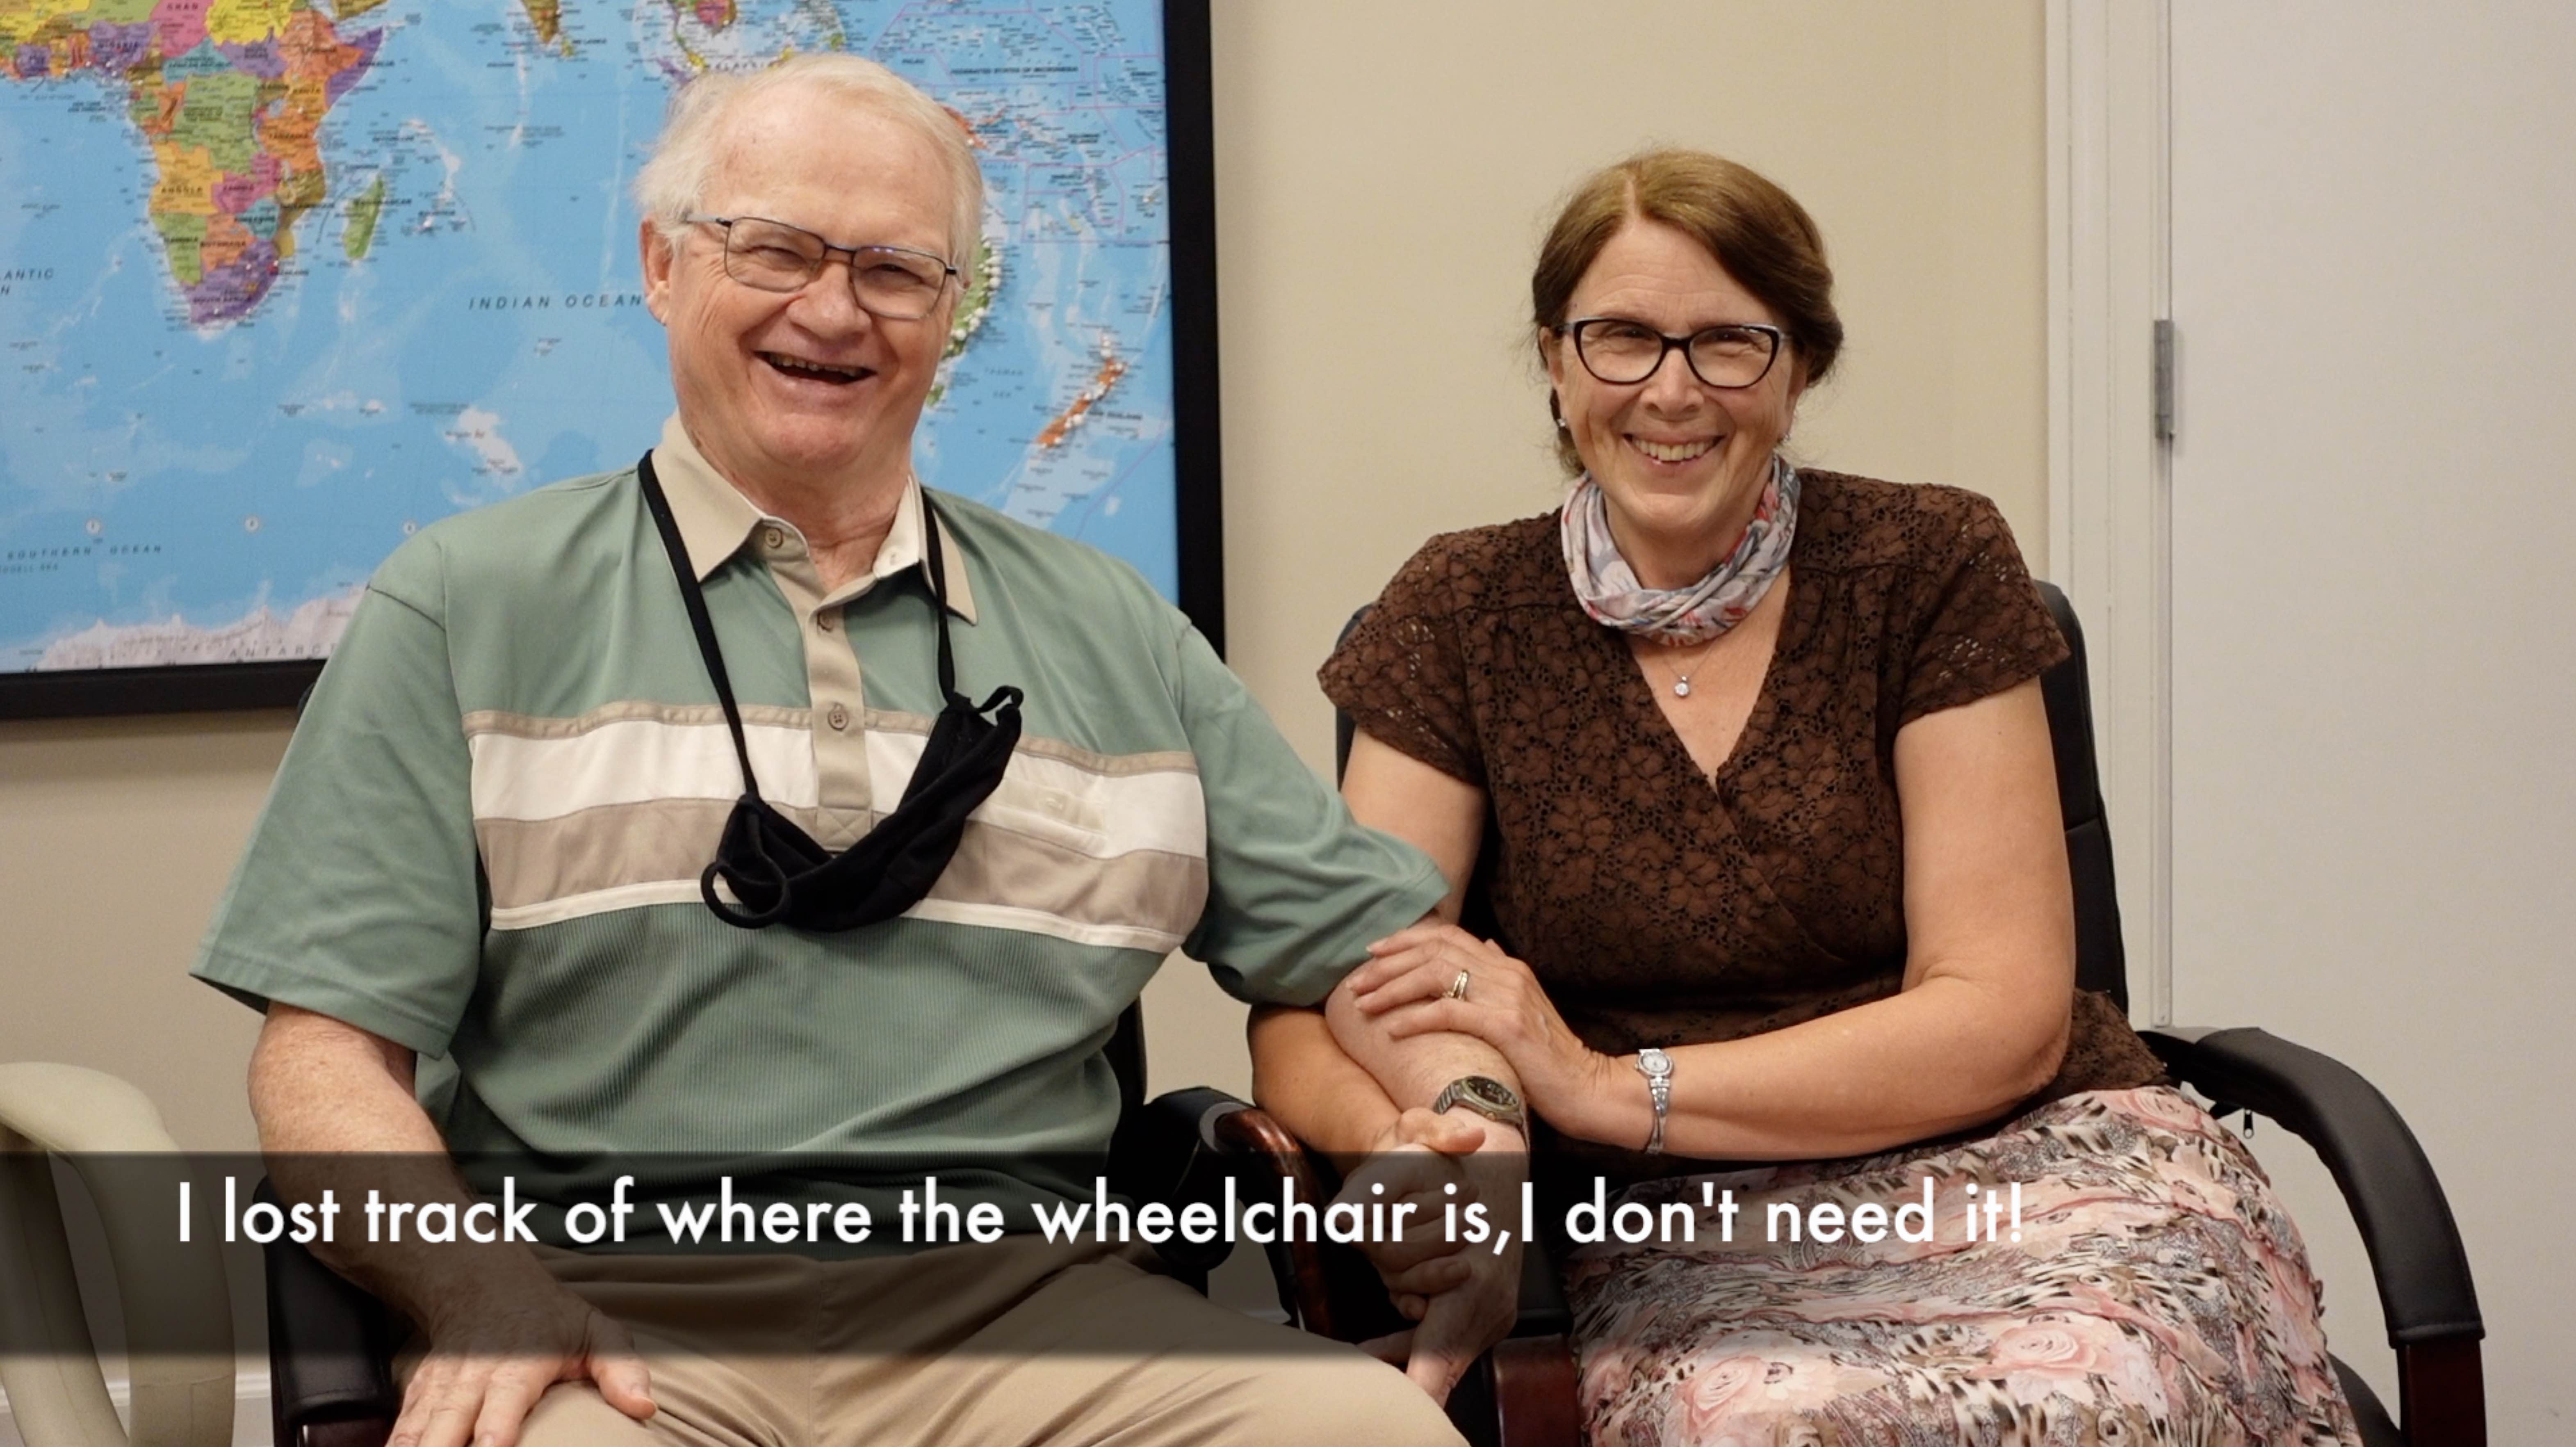 “I lost track of where the wheelchair is, I don’t need it!” after treatment by Edward Tobinick, M.D.